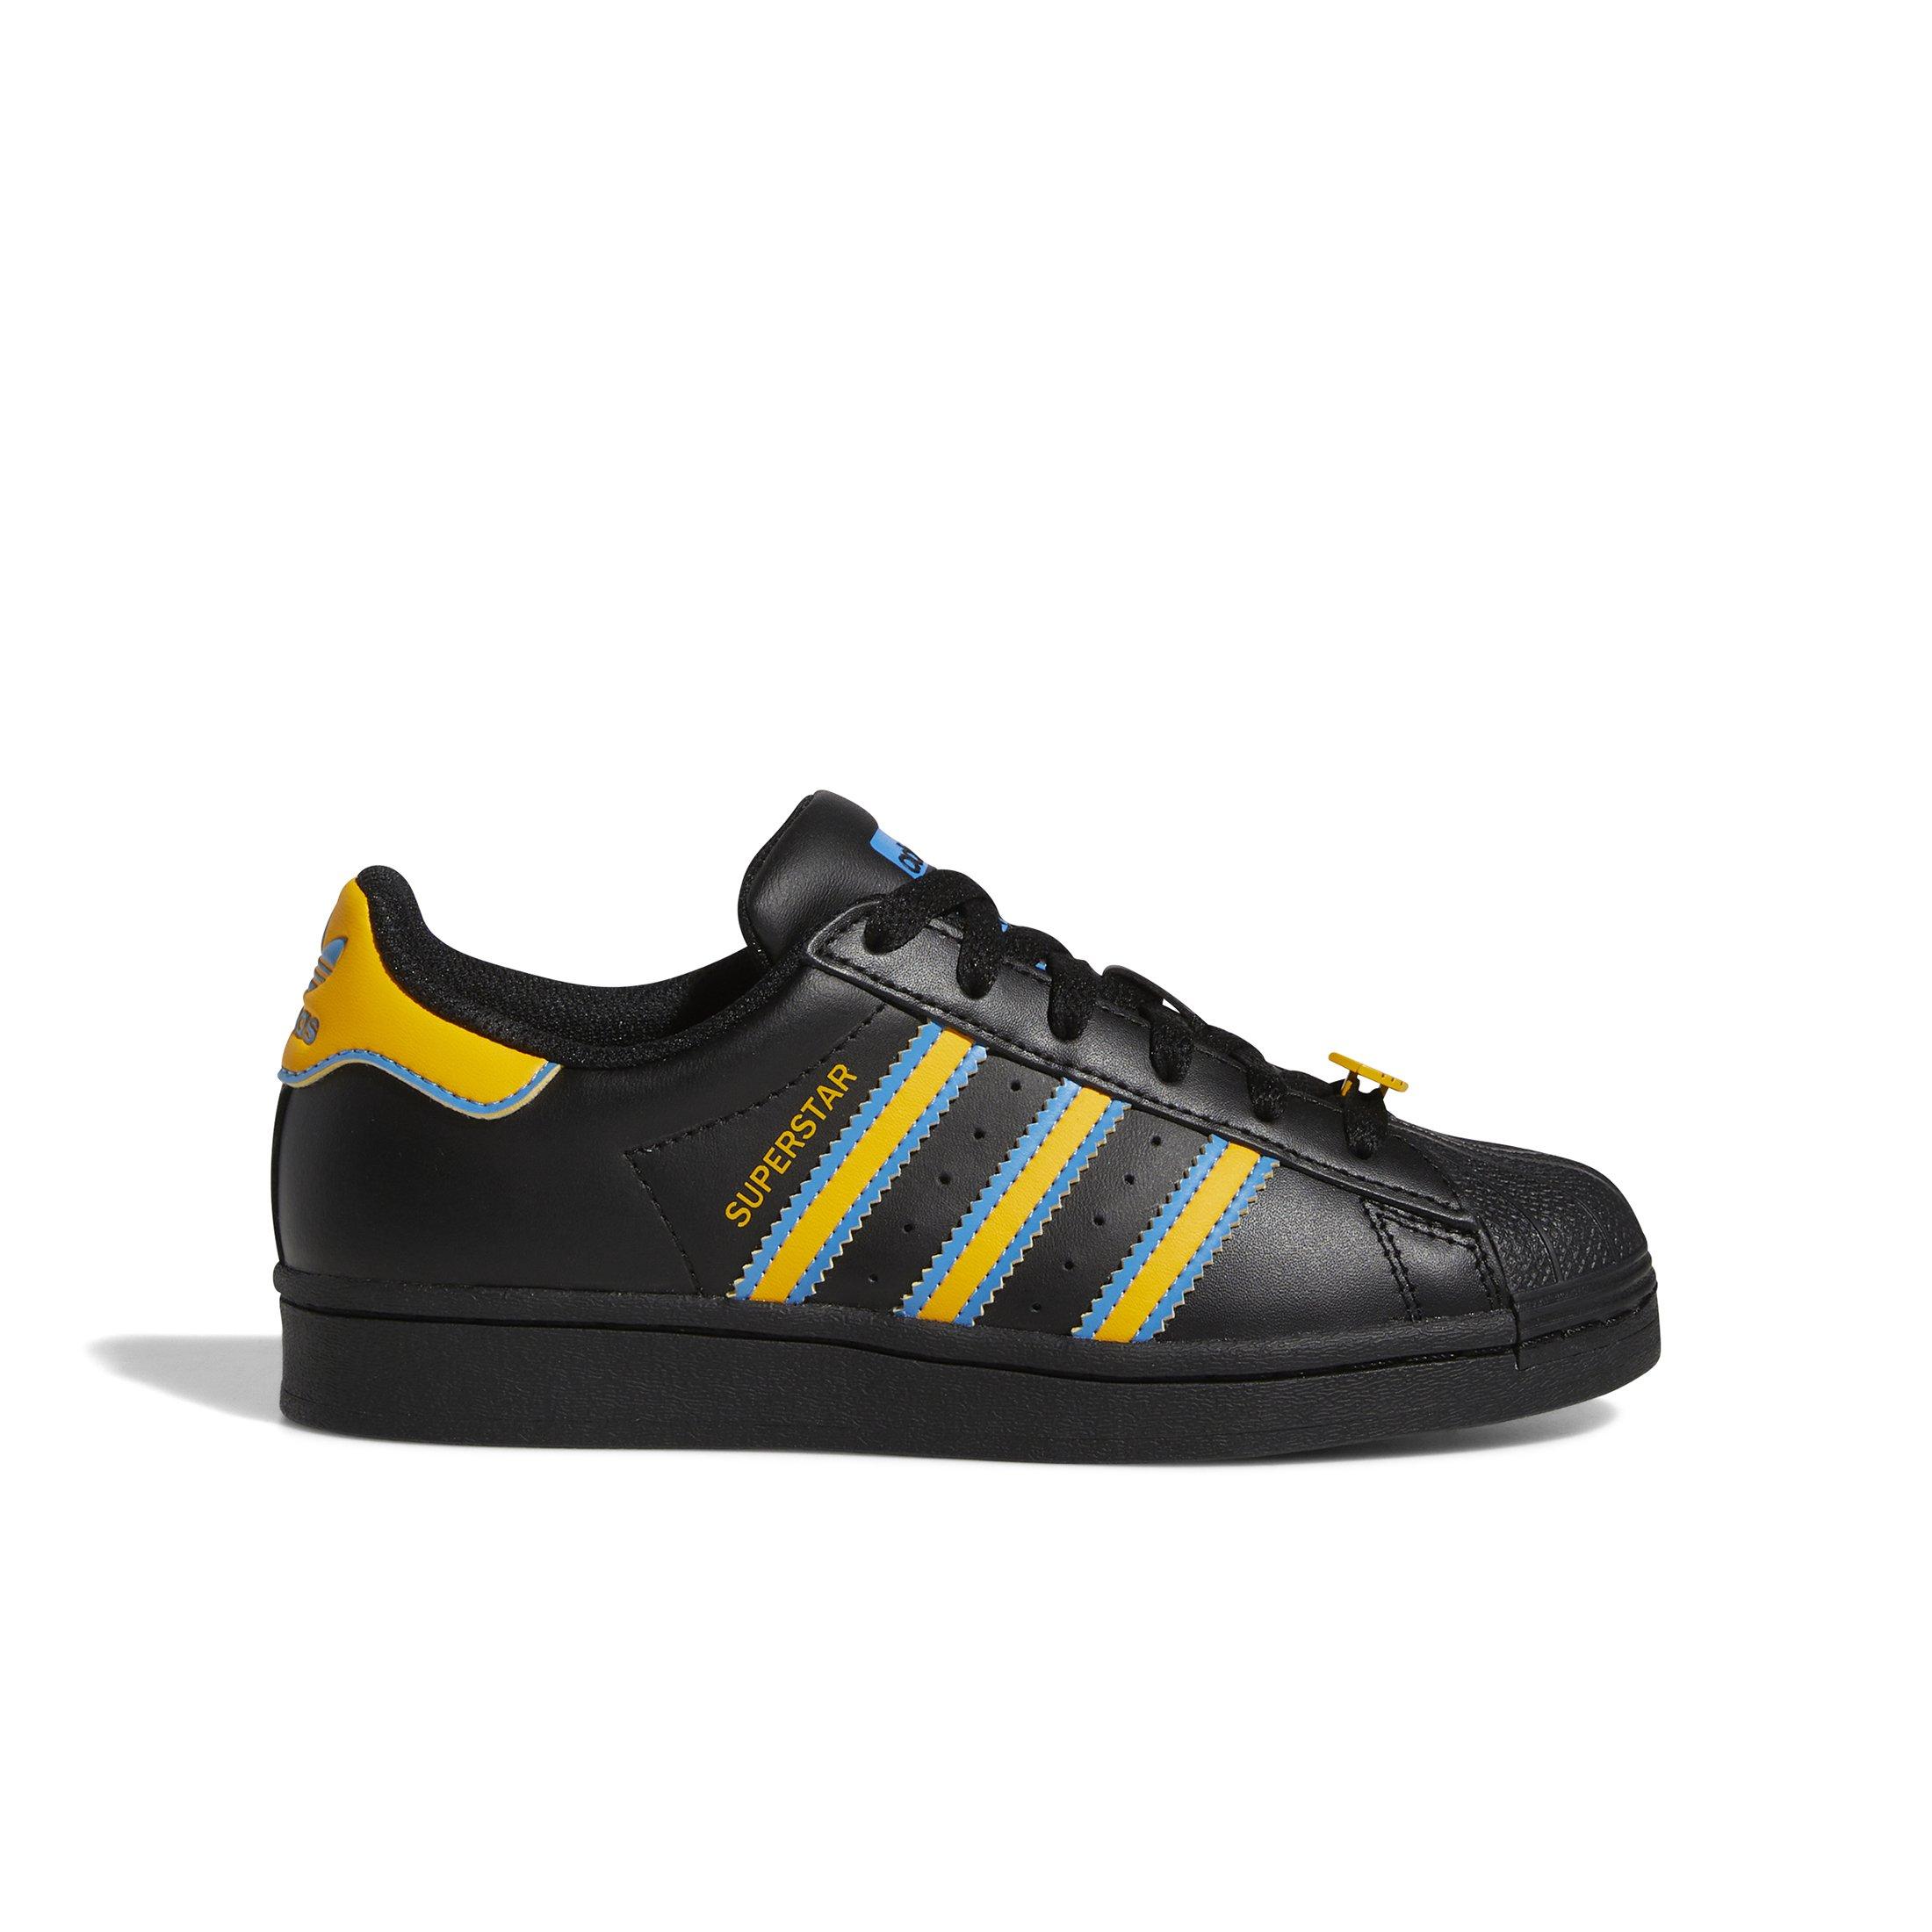 adidas superstar shoes black and gold